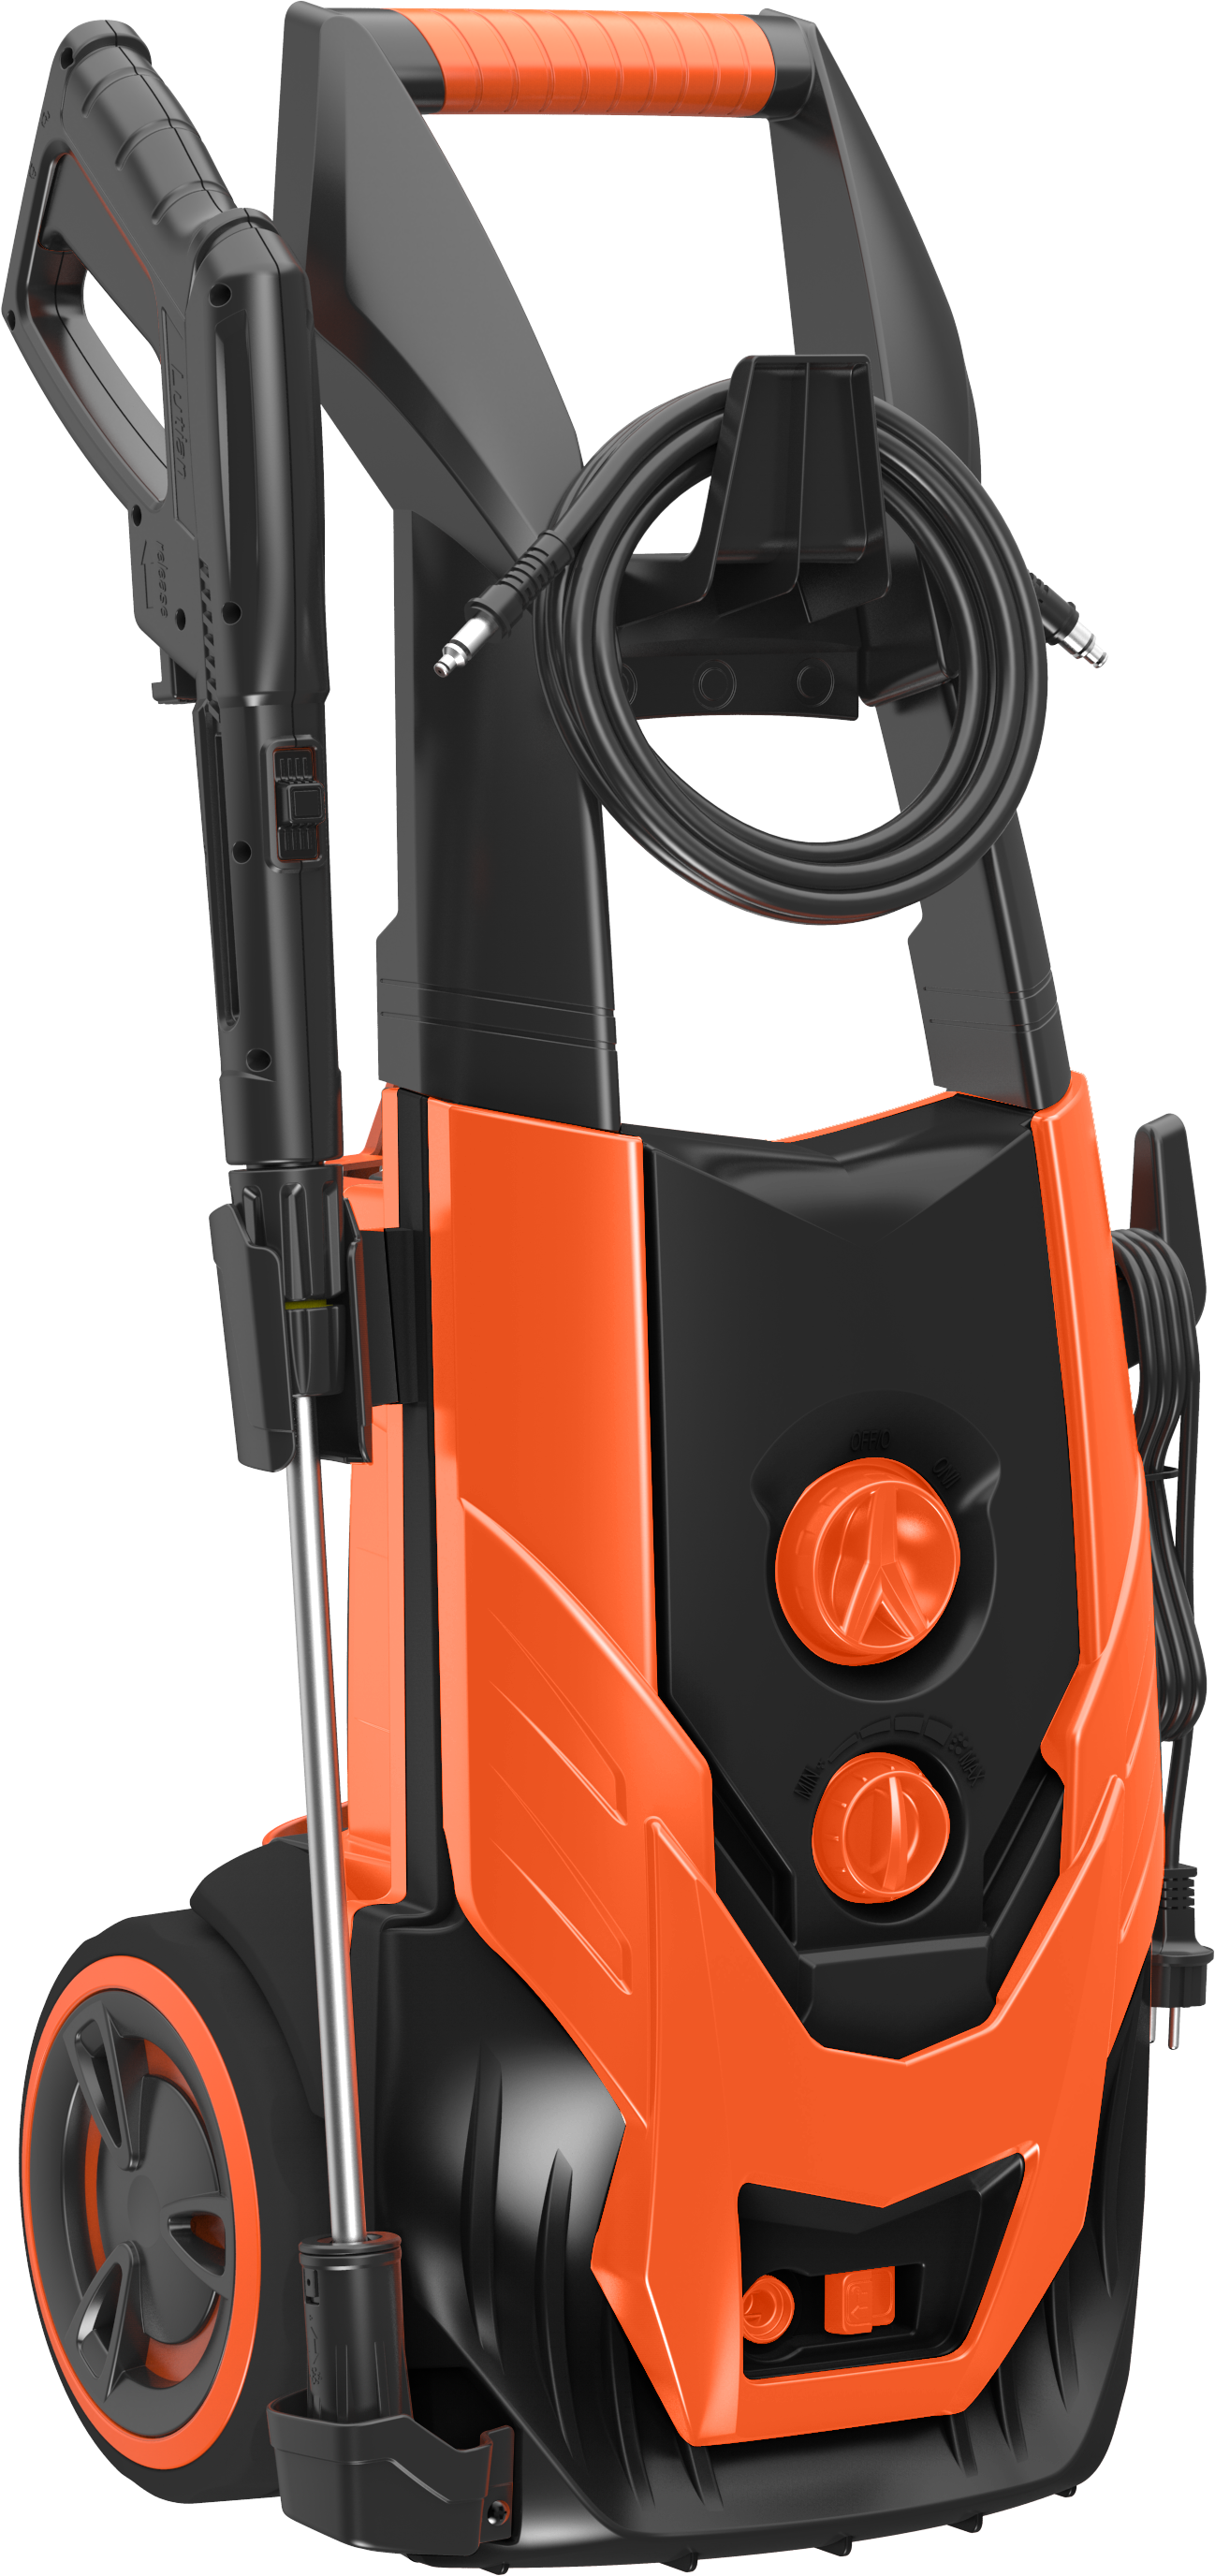 Household Electric high pressure washer